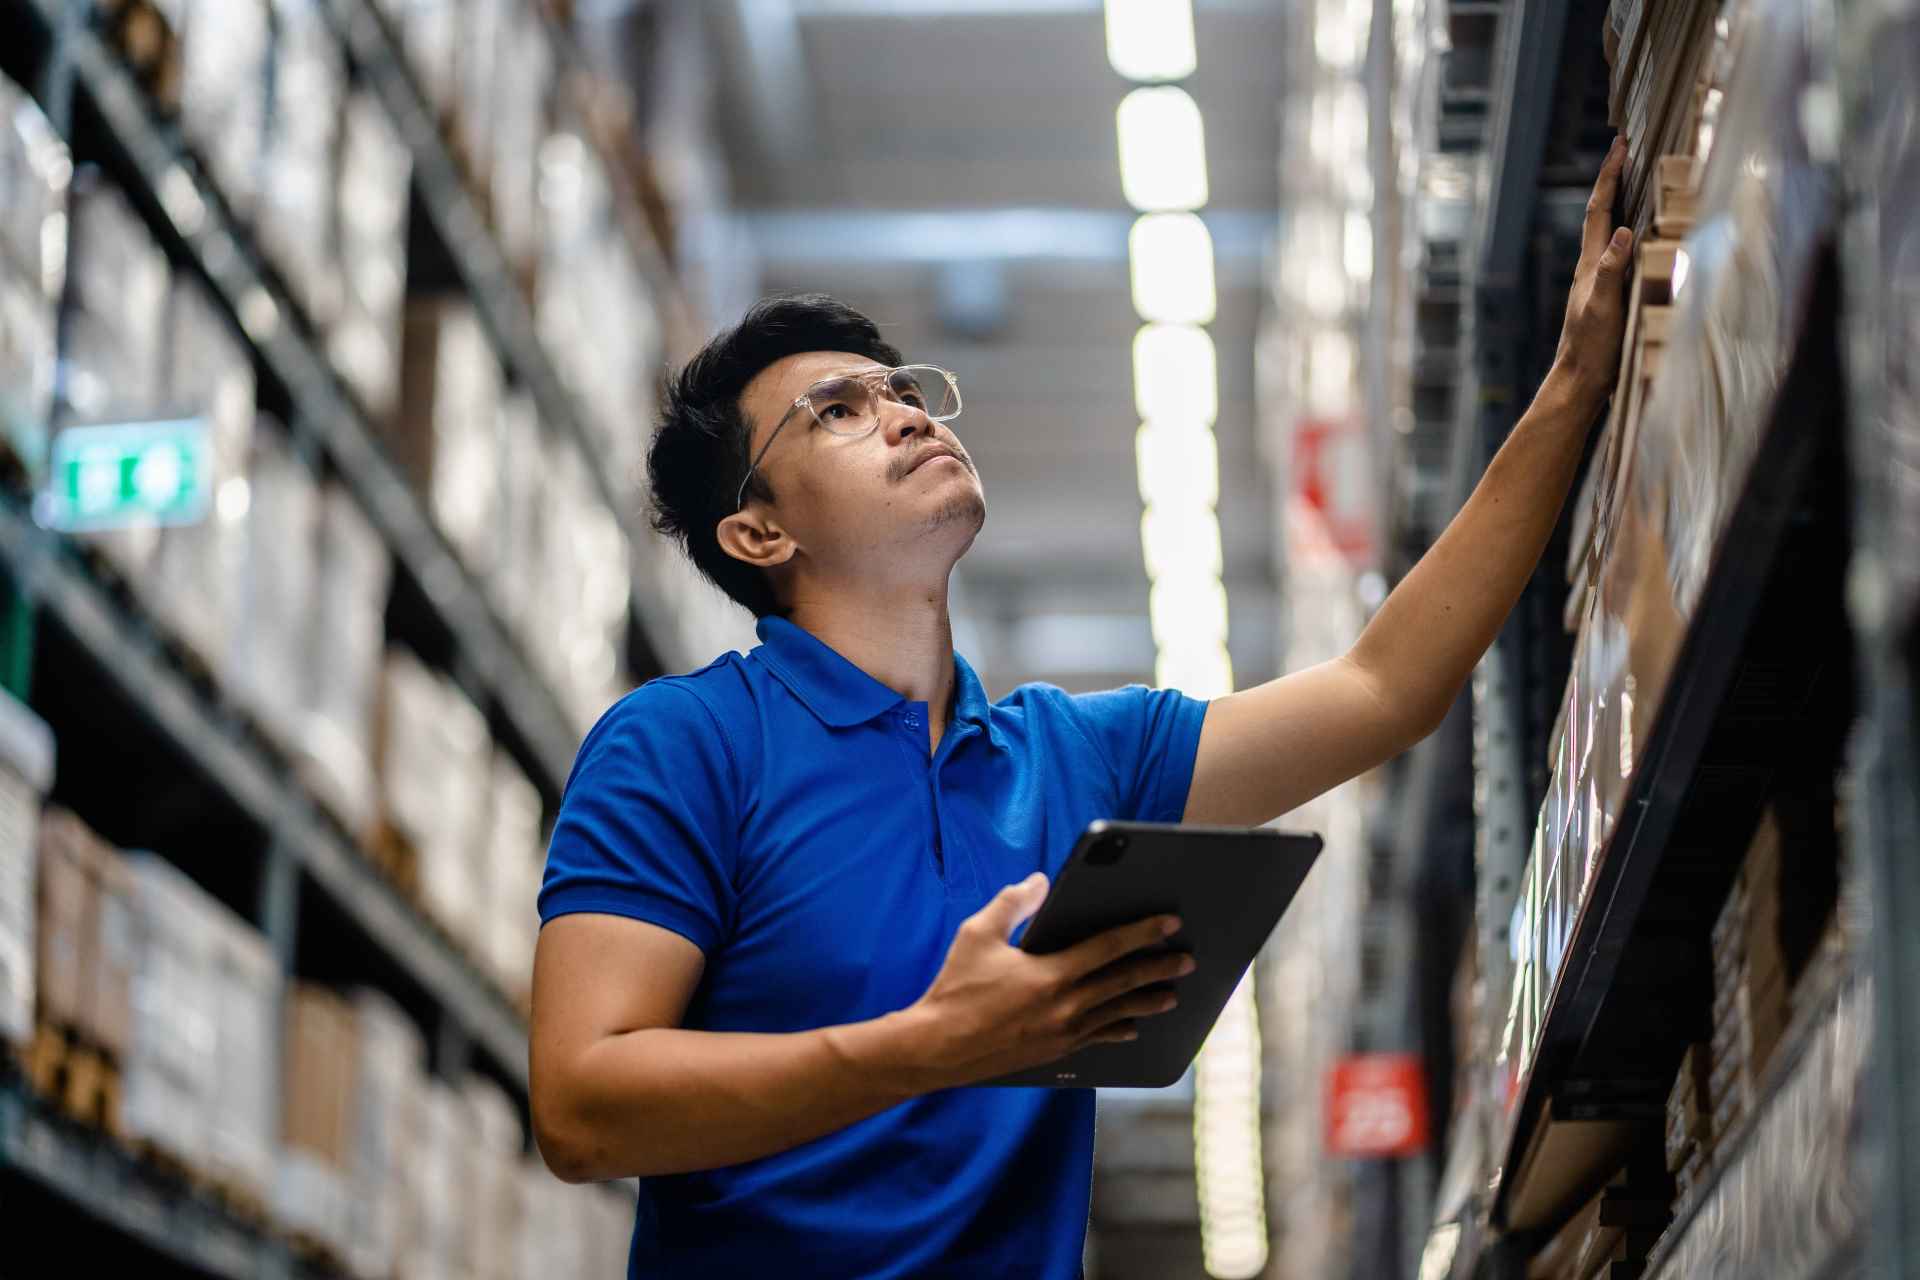 5 features your inventory management system should have